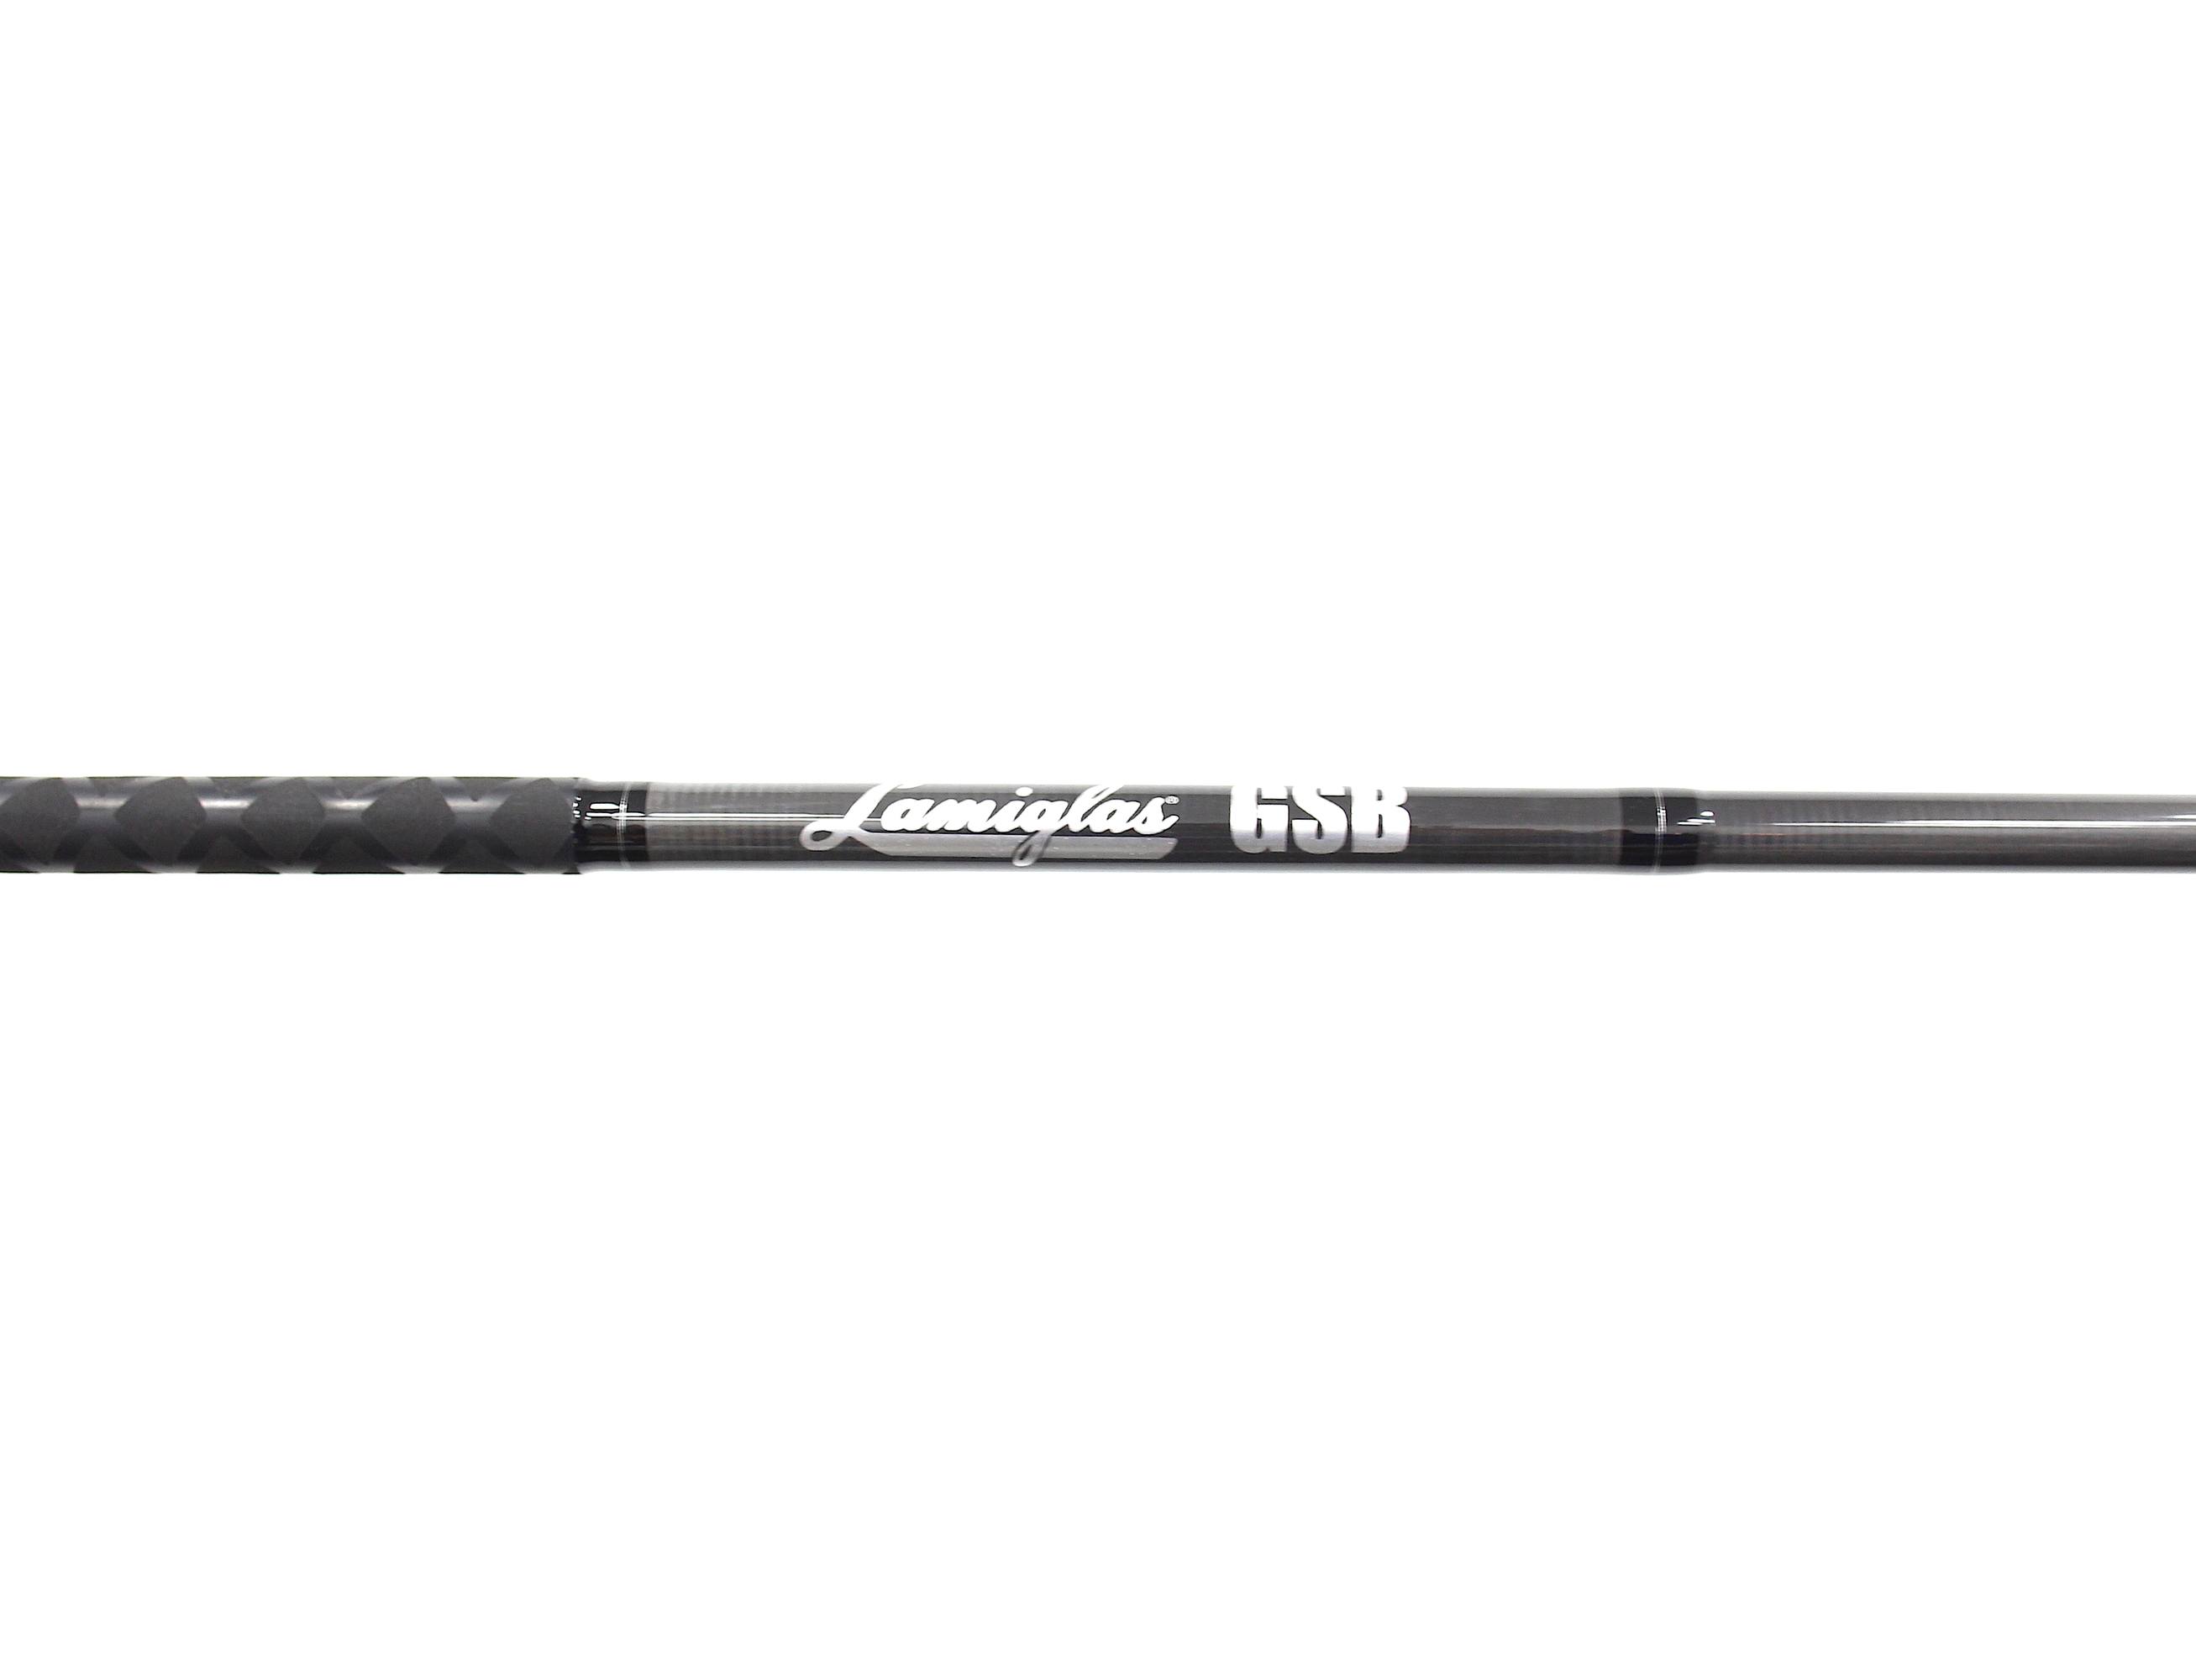 Lamiglas Gsb Surf Rod, 2 Piece, 17-40 Line, WT, 2-5 Lure, WT, Moderate,  Medium, X-Flock Style Handle GSB10MS with Free S&H — CampSaver